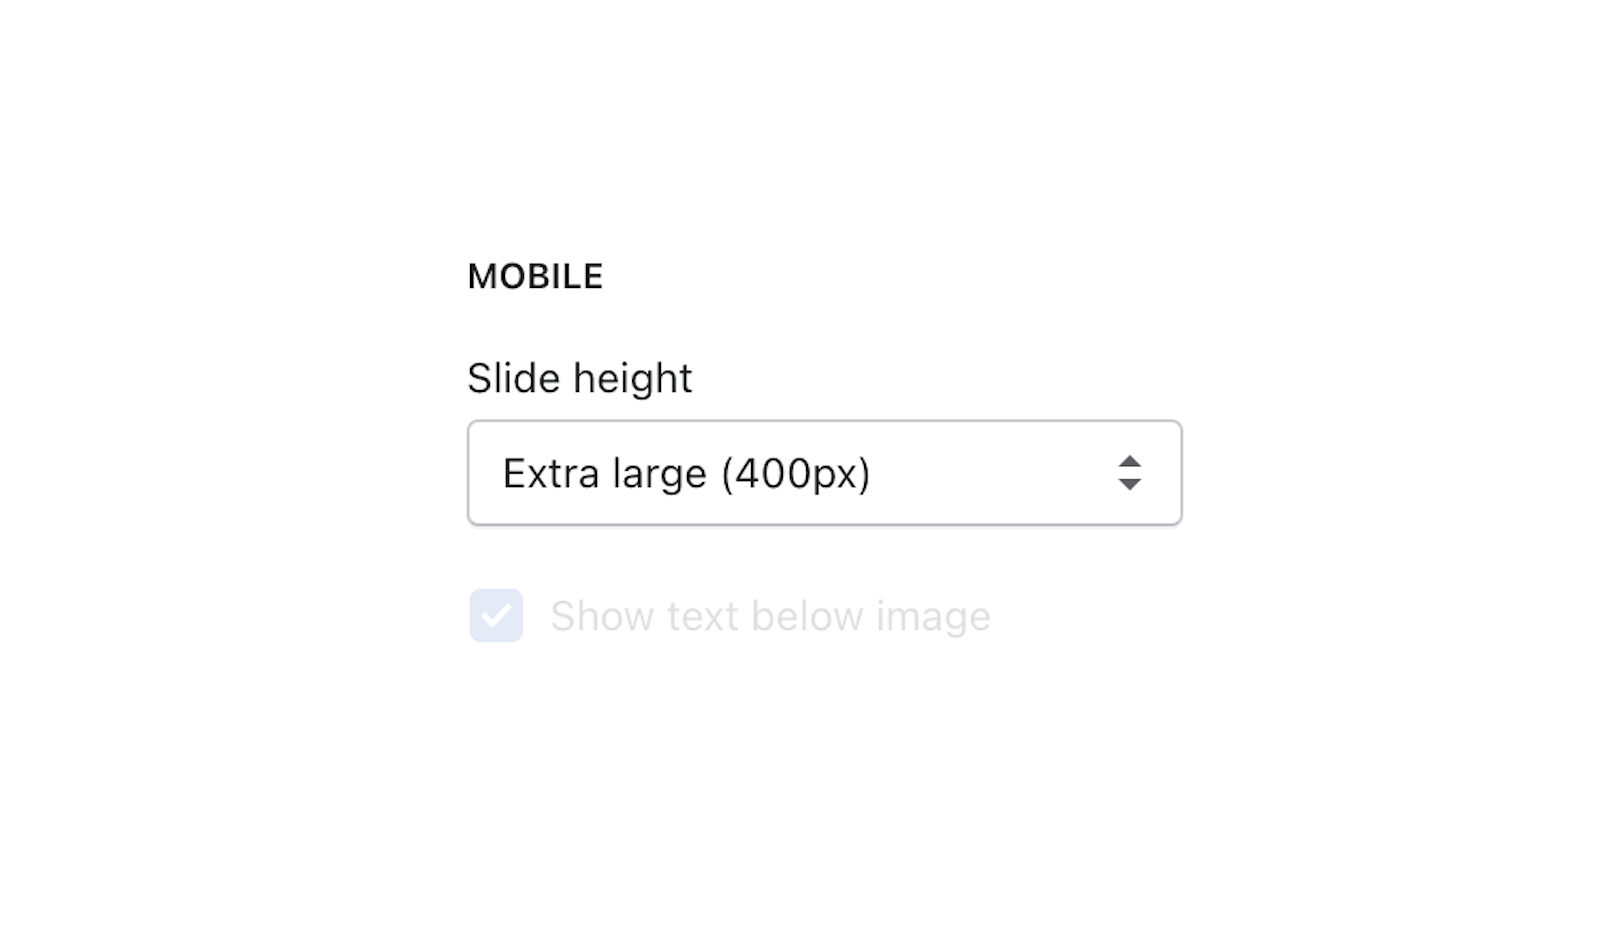 mobile_slide_height_set_to_extra_large_setting.png